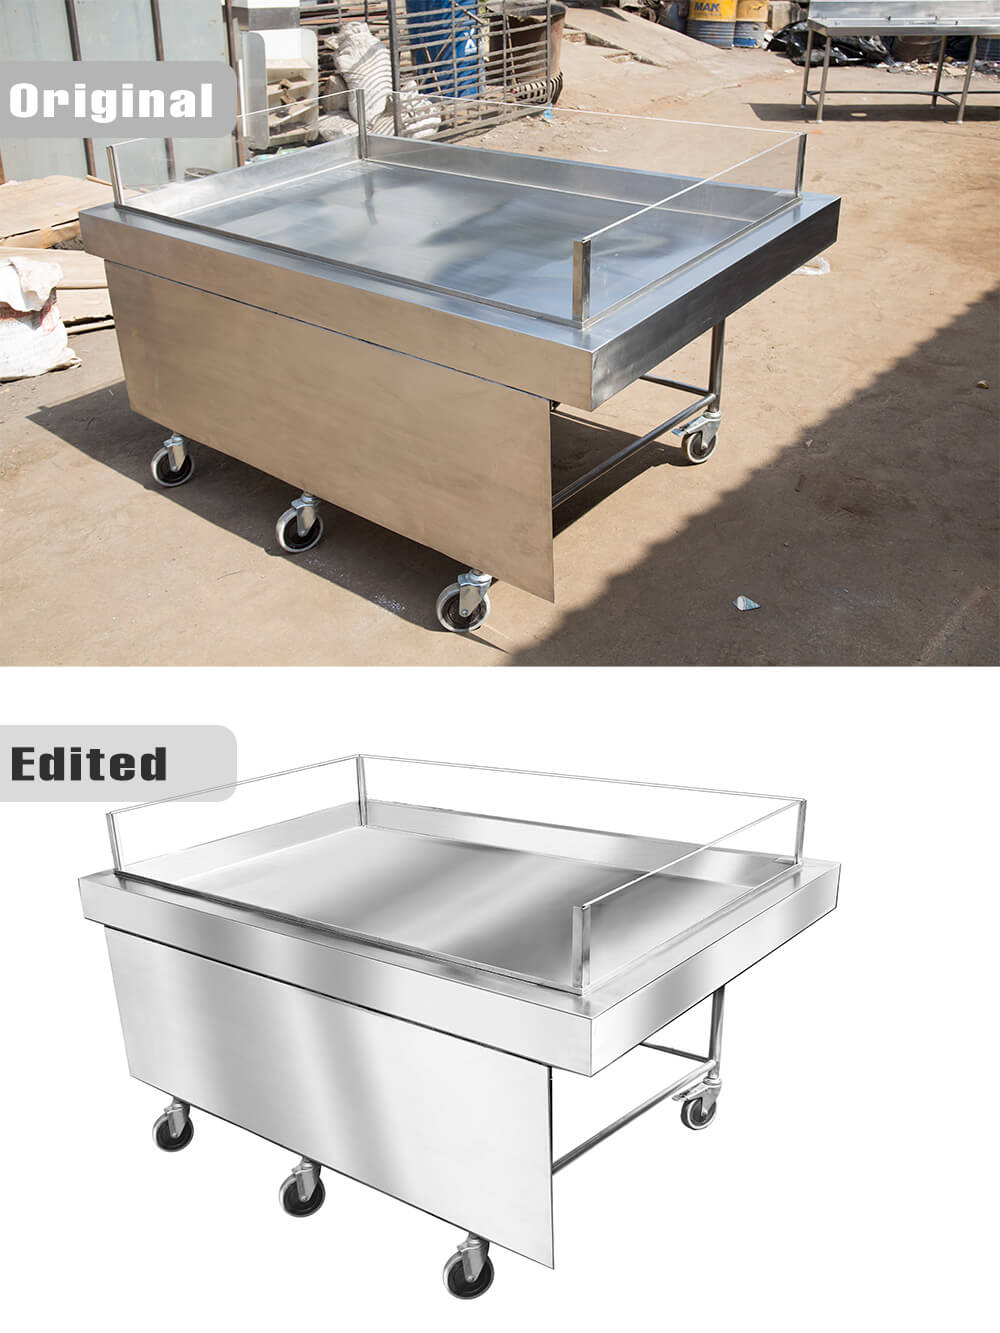 High level editing of stainless steel counter